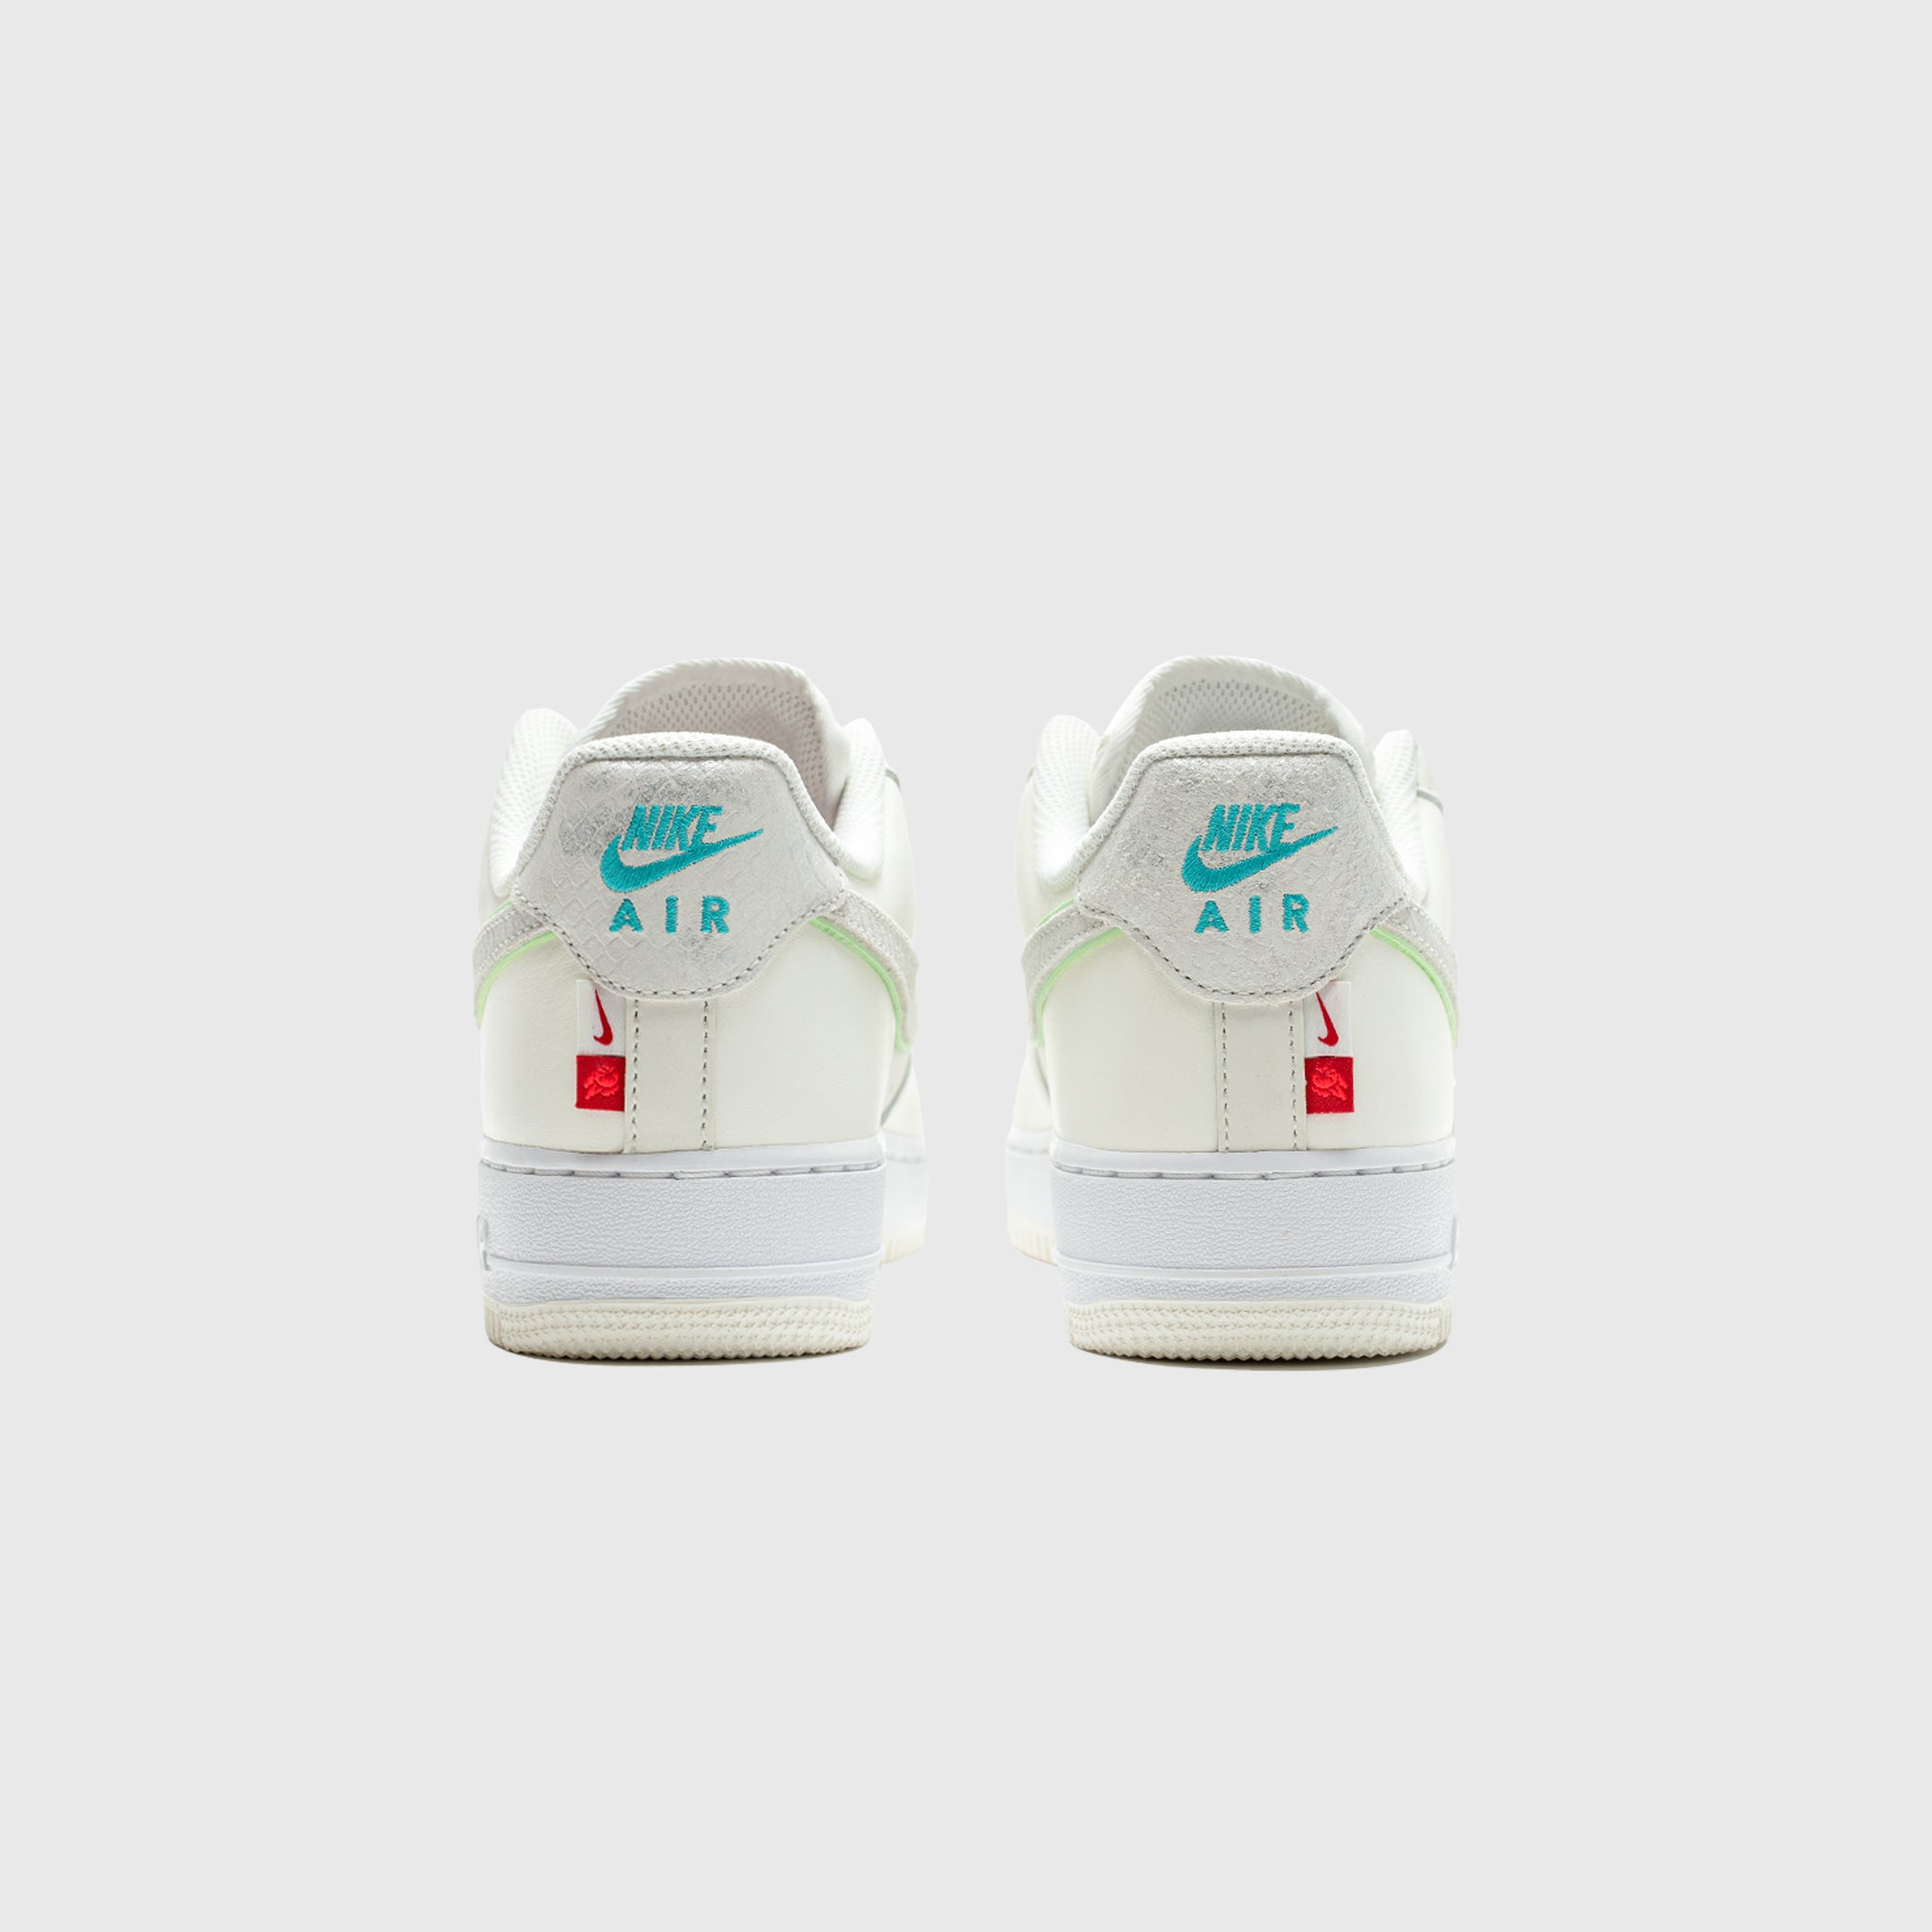 AIR FORCE 1 '07 "YEAR OF THE DRAGON"